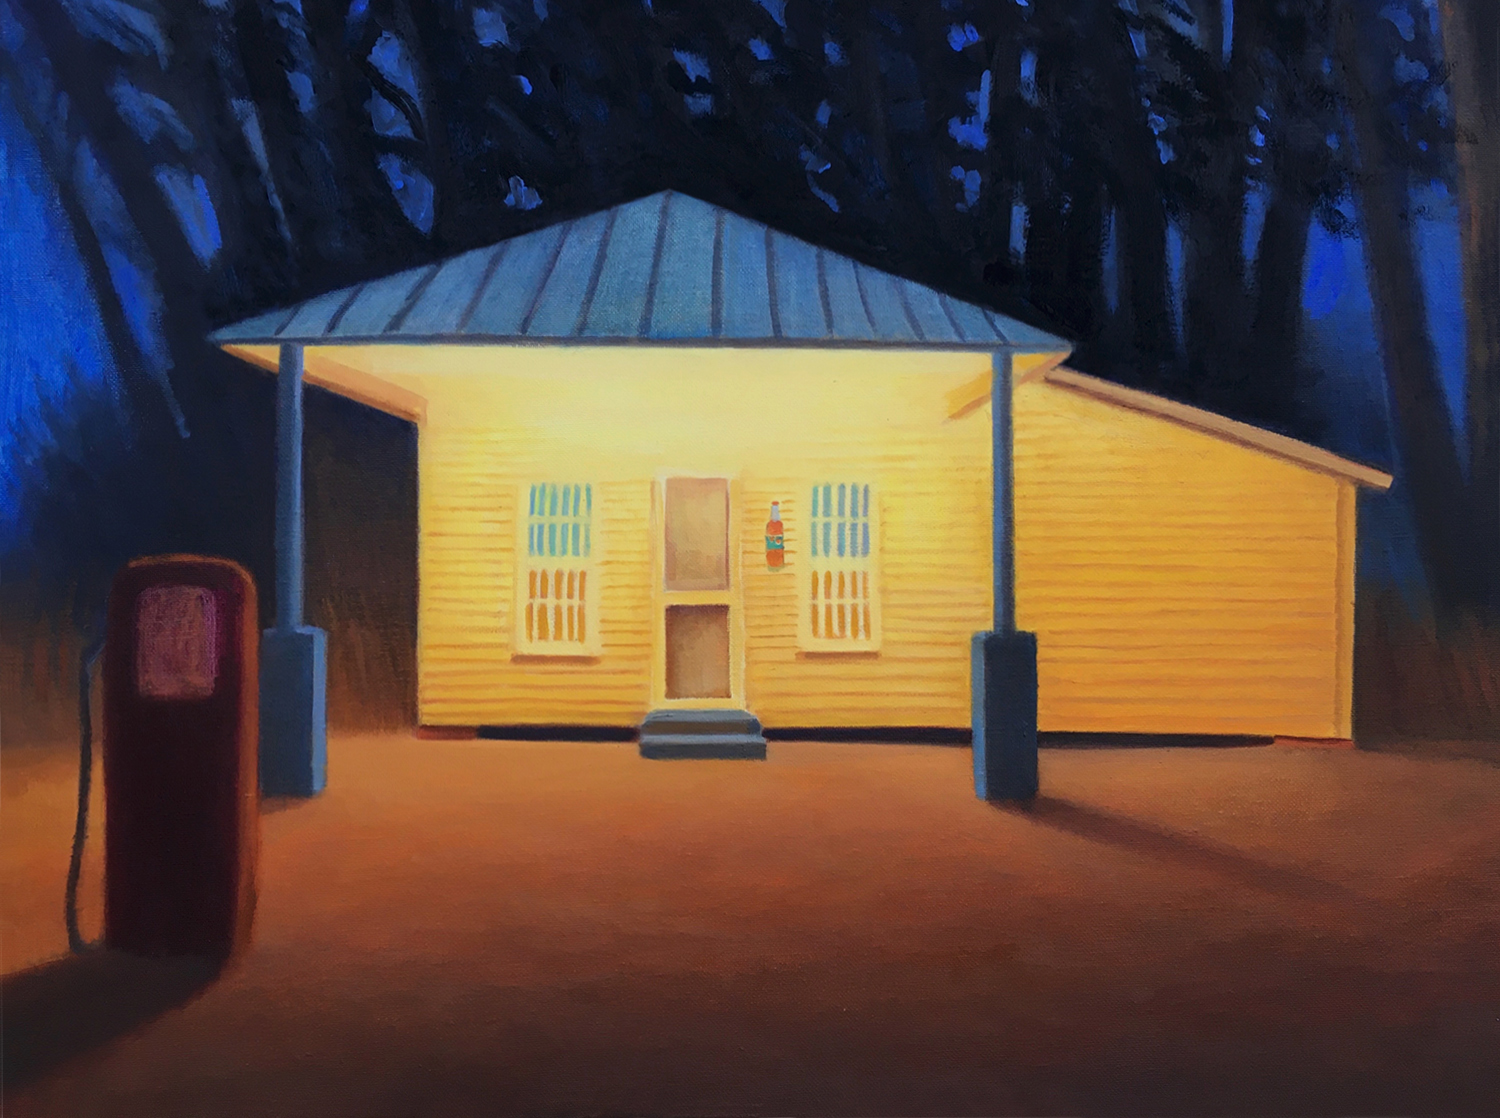 Deadwood Station Revival by David Davenport 18X24 oil on canvas at Craven Allen Gallery  1800